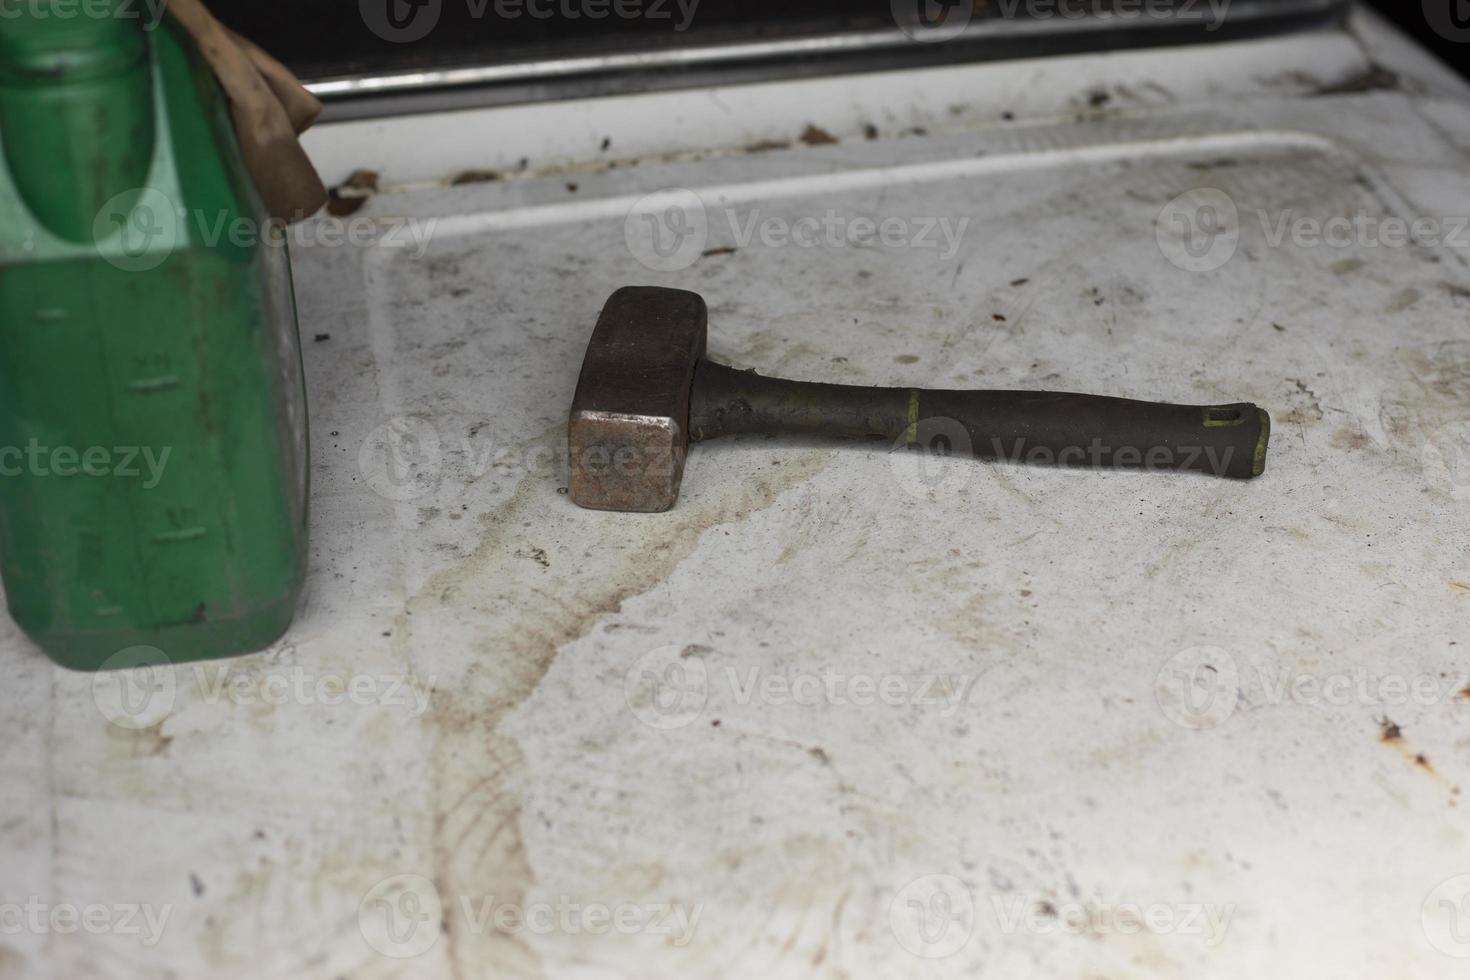 Steel hammer lies on surface. Tool for hammering nails. photo